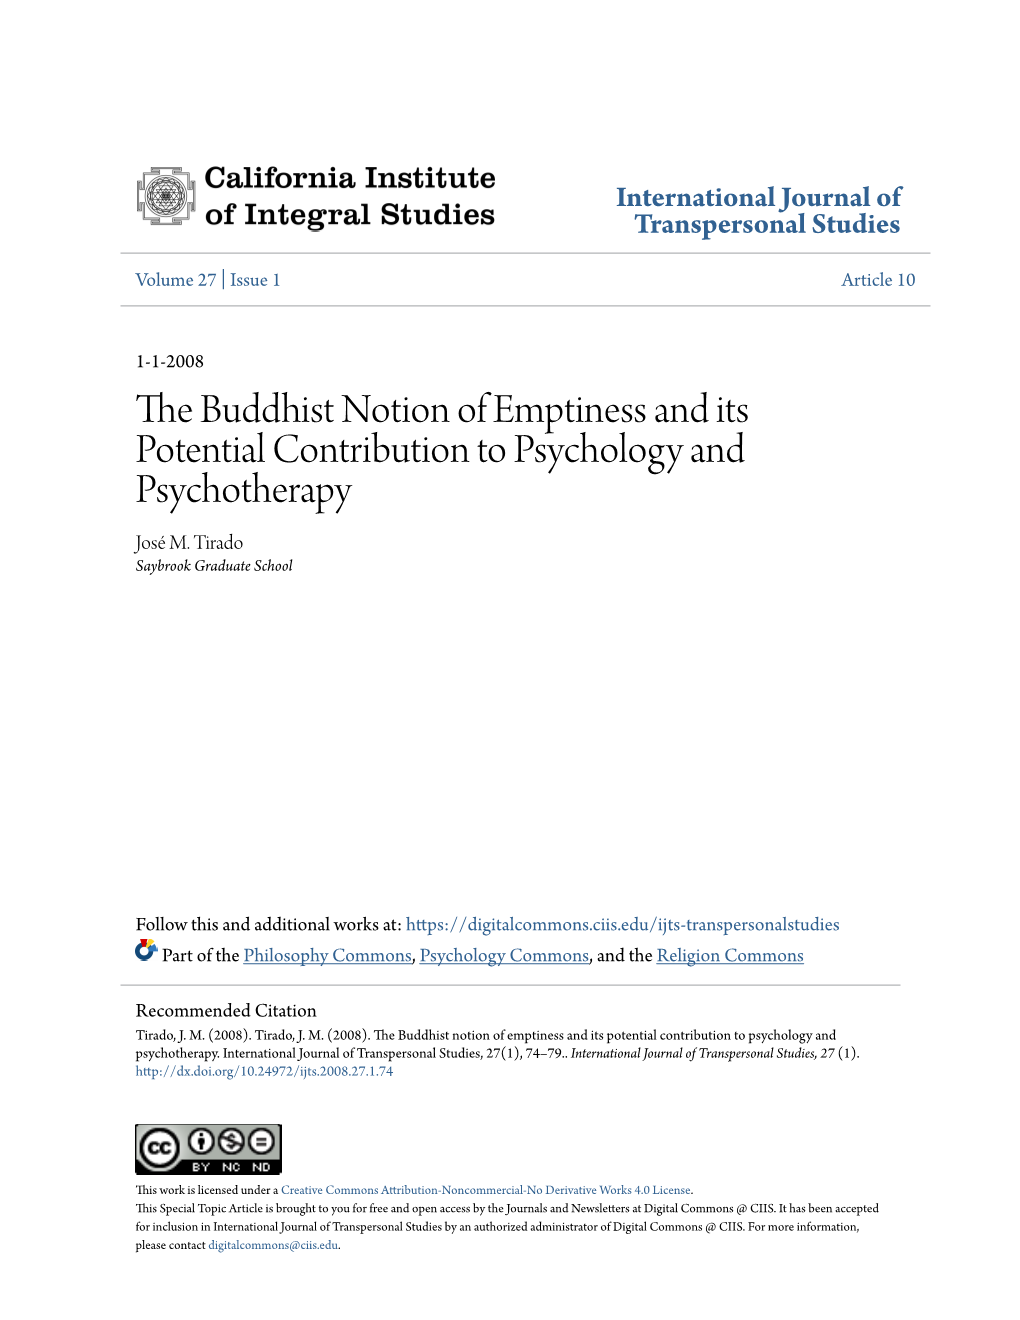 The Buddhist Notion of Emptiness and Its Potential Contribution To